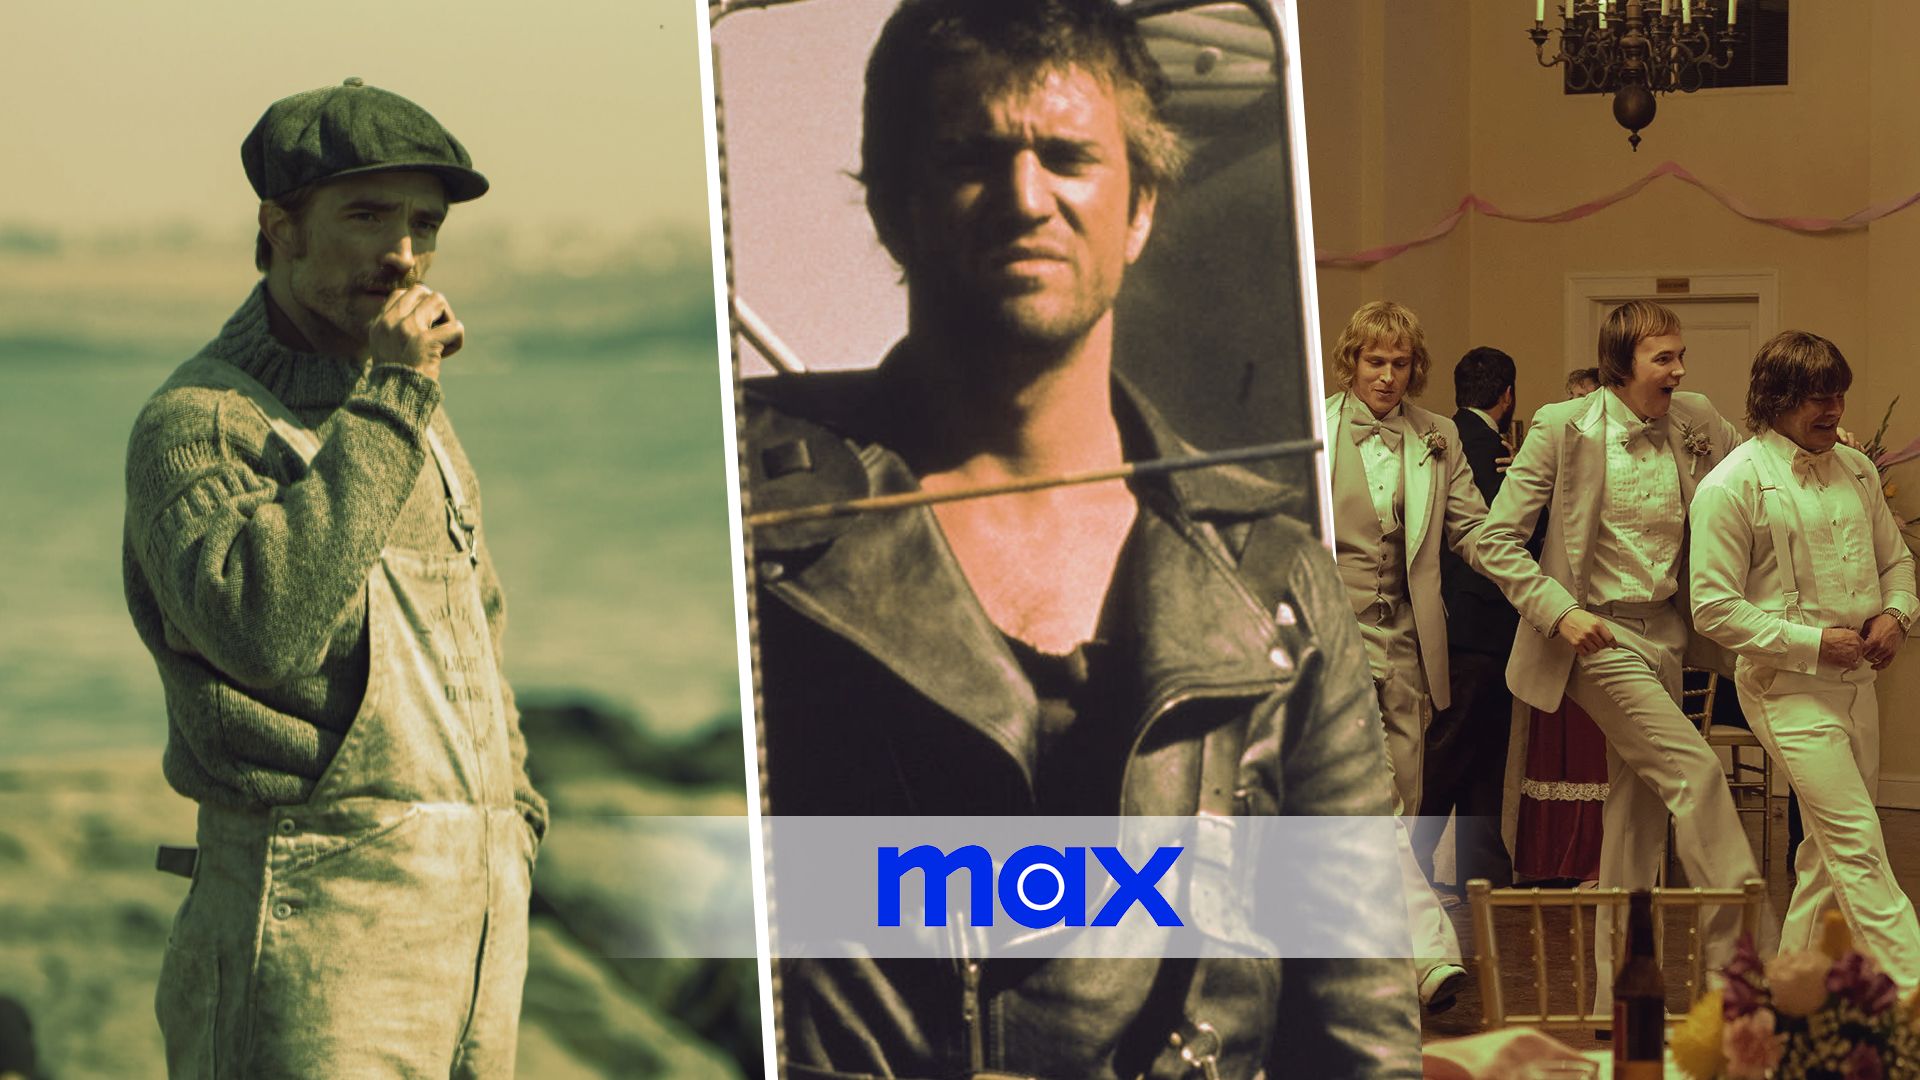 An edited image of three movies with the Max logo including The Lighthouse, Mad Max 2, and The Iron Claw